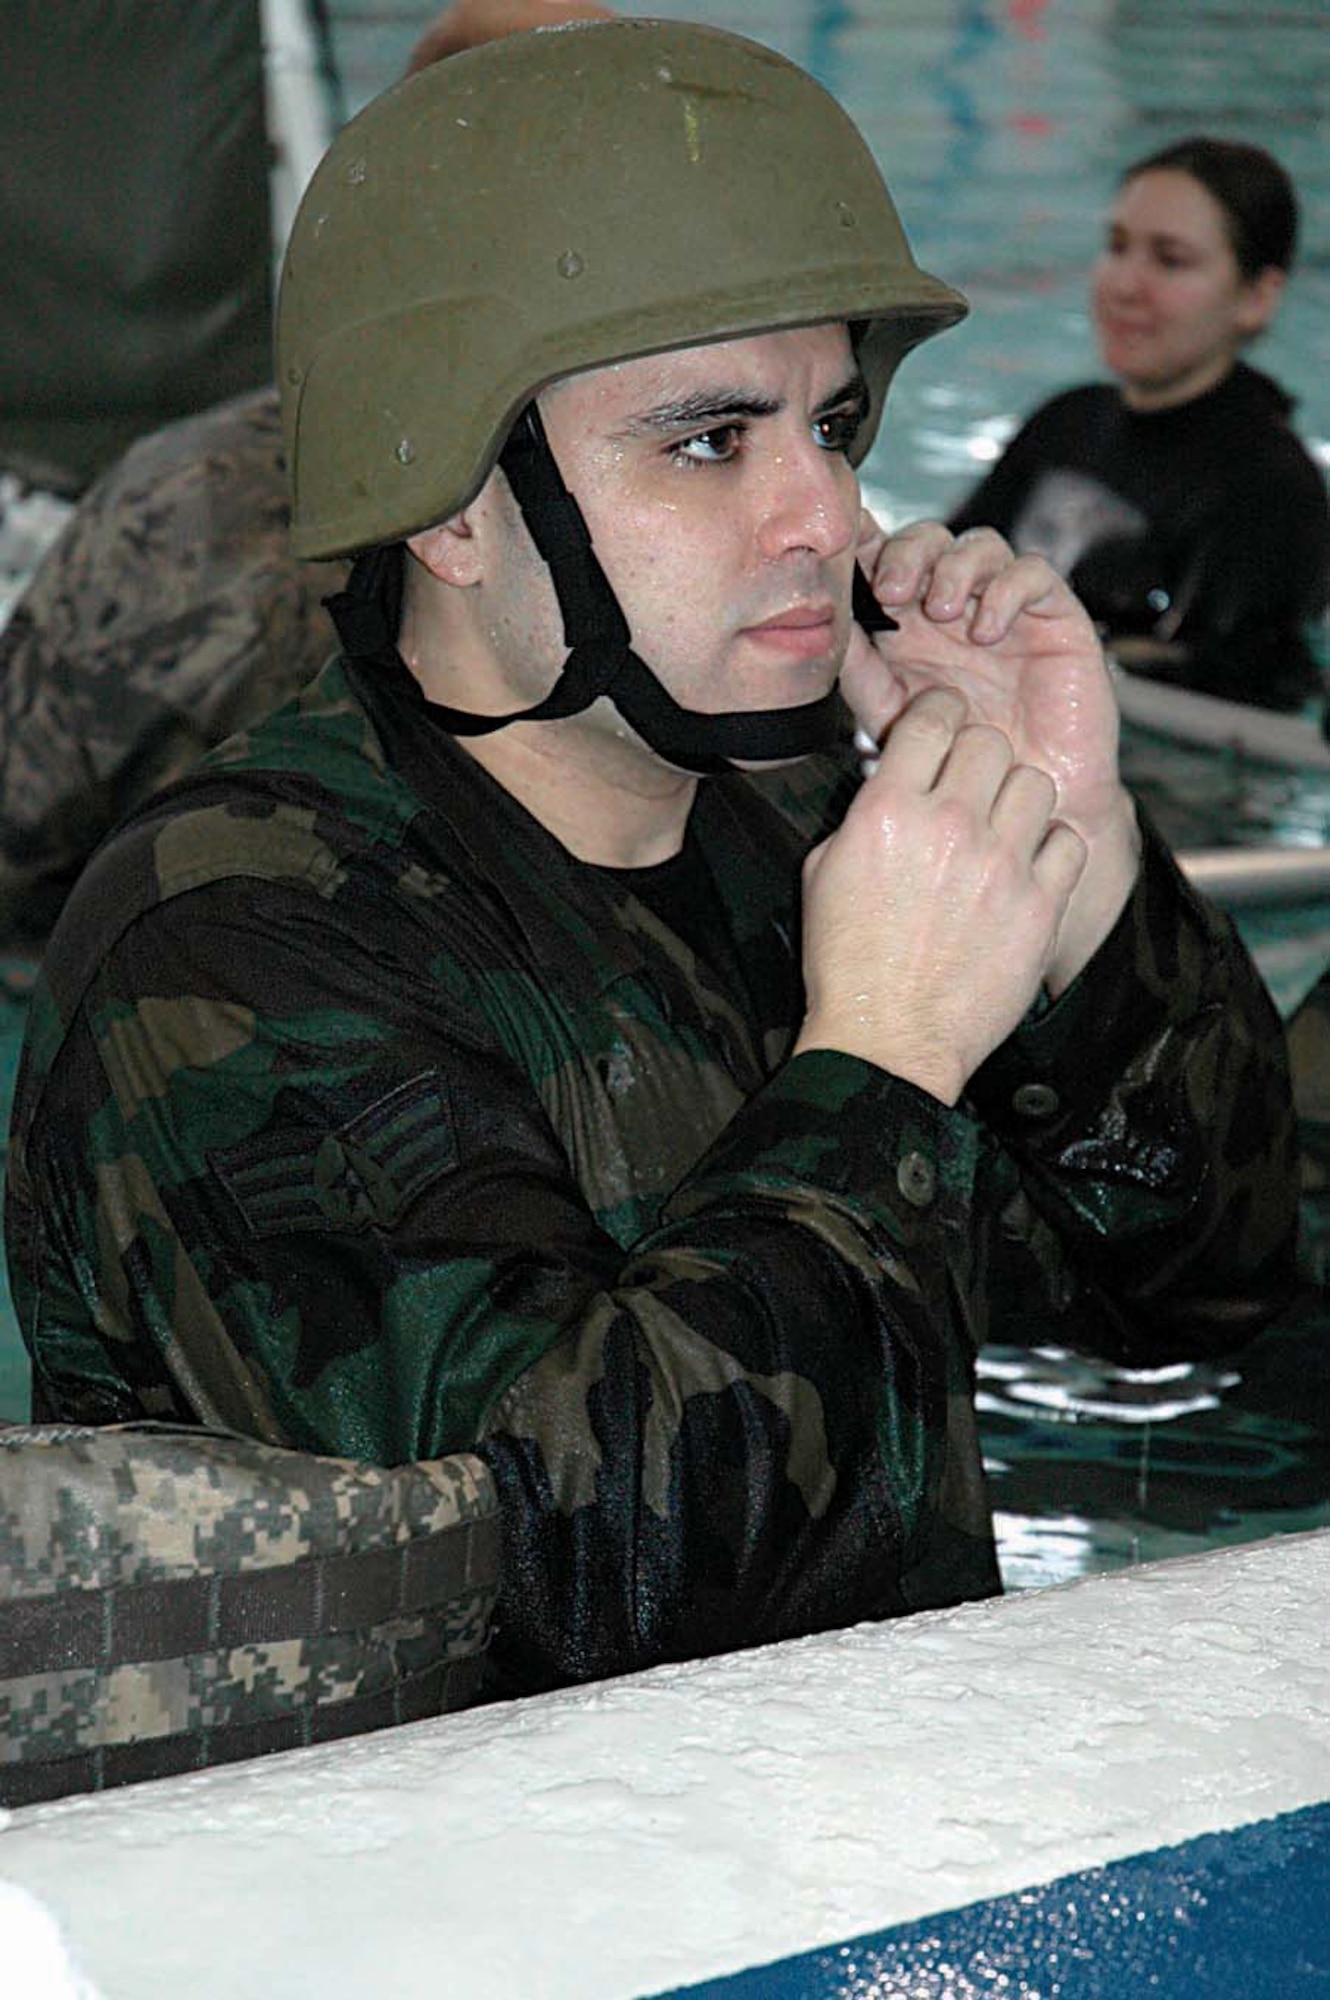 Staff Sgt. Freddie Garza, a Reservist with the 446th Security Forces Squadron, McChord Air Force Base, Wash., dons his Kevlar helment in preparation for Humvee rollover training Feb. 8 at Fort Lewis, the nearby Army post.  As part of the rollover training, security forces Reservists were dunked into water, blindfolded, and had to navigate out of one of two simulated Humvee doors. (U.S. Air Force photo/Airman First Class Patrick Cabellon)